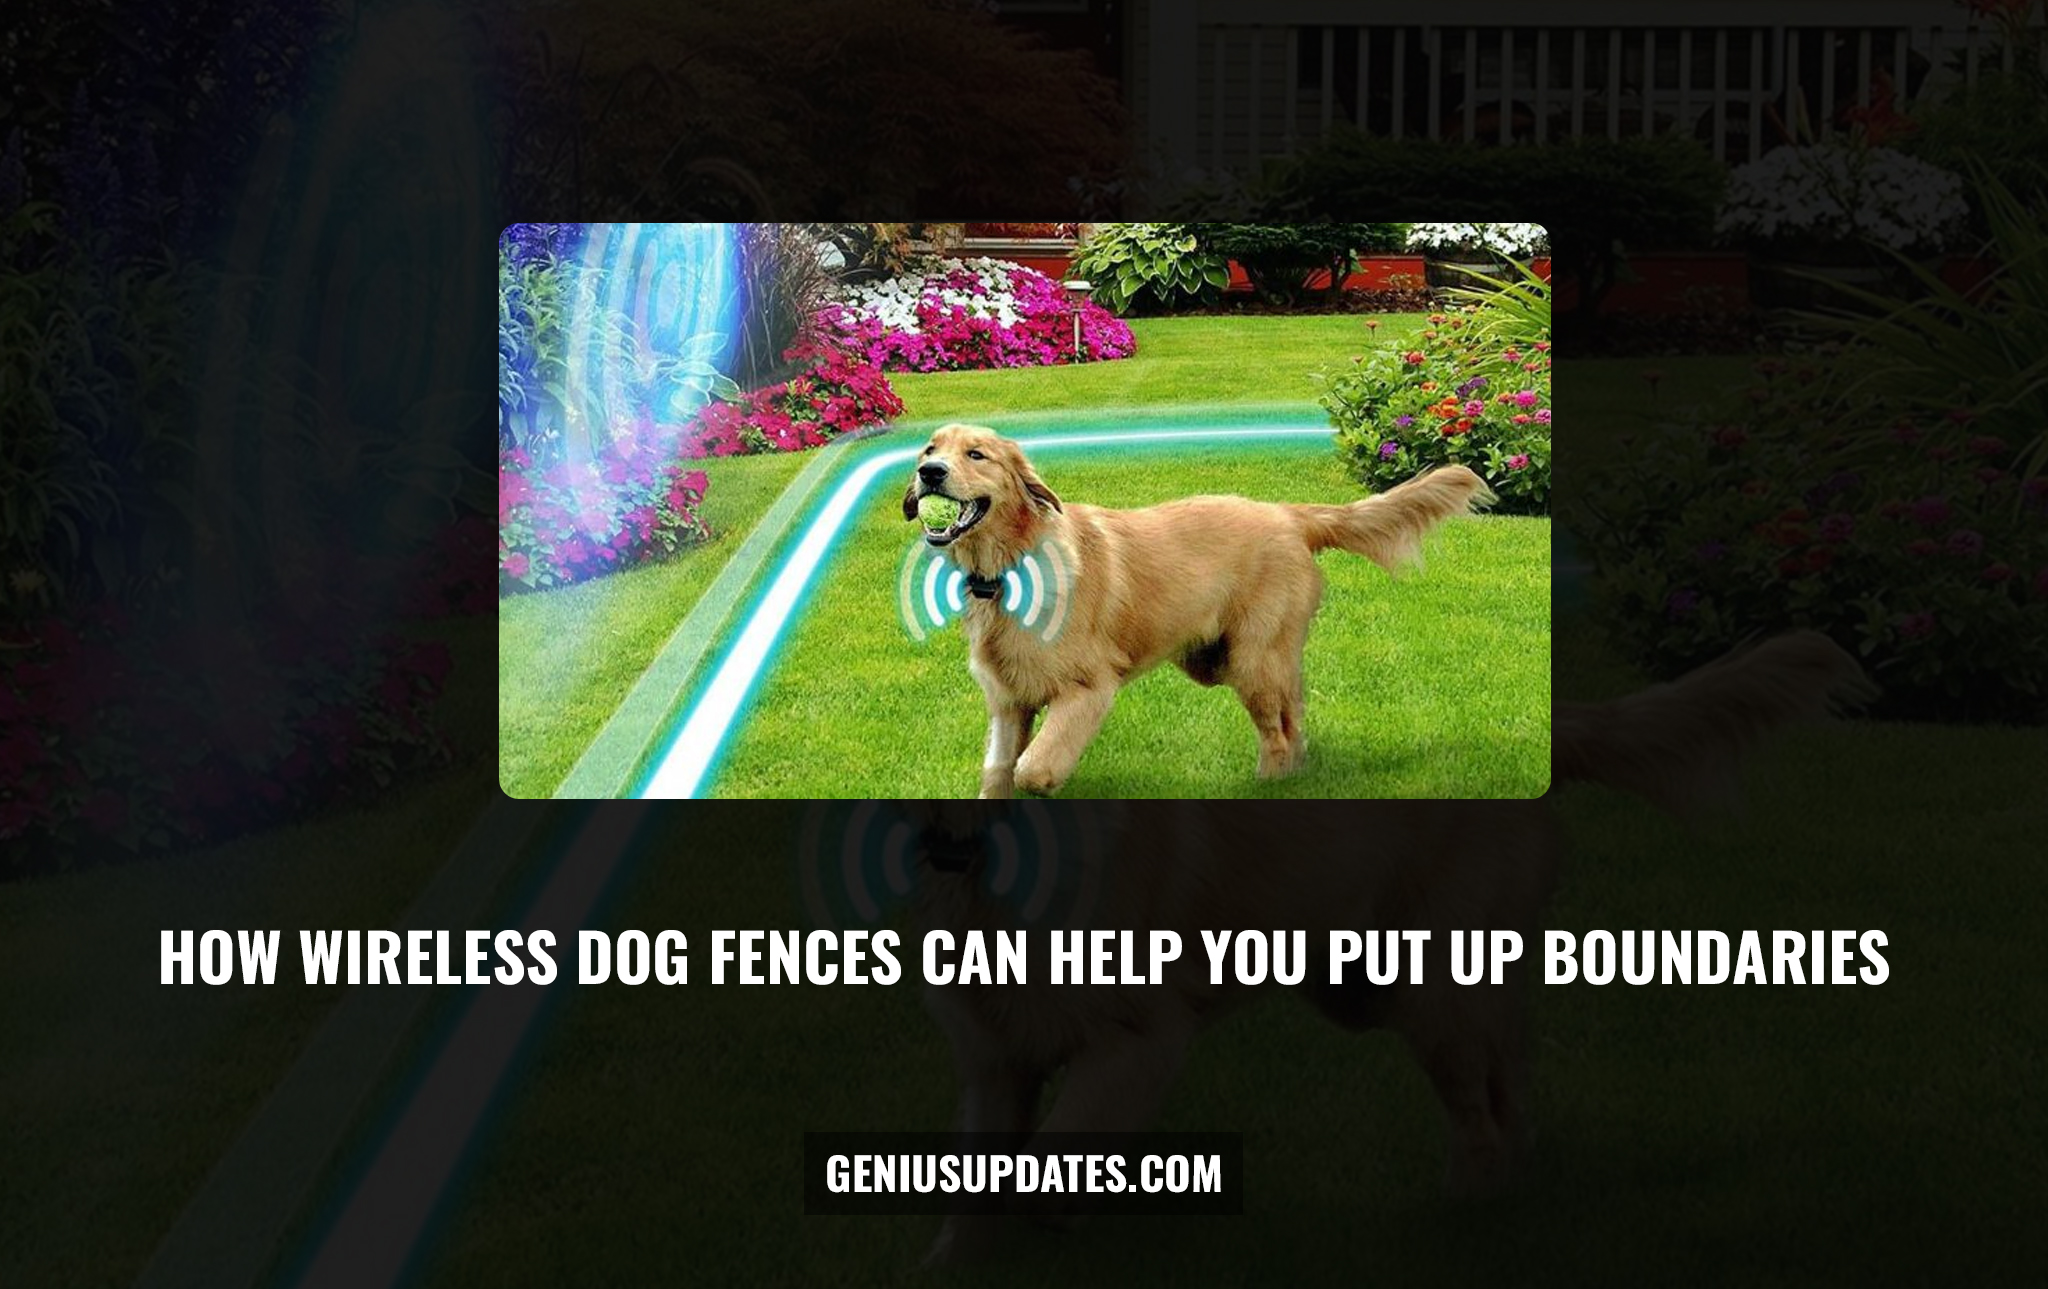 How Wireless Dog Fences Can Help You Put Up Boundaries